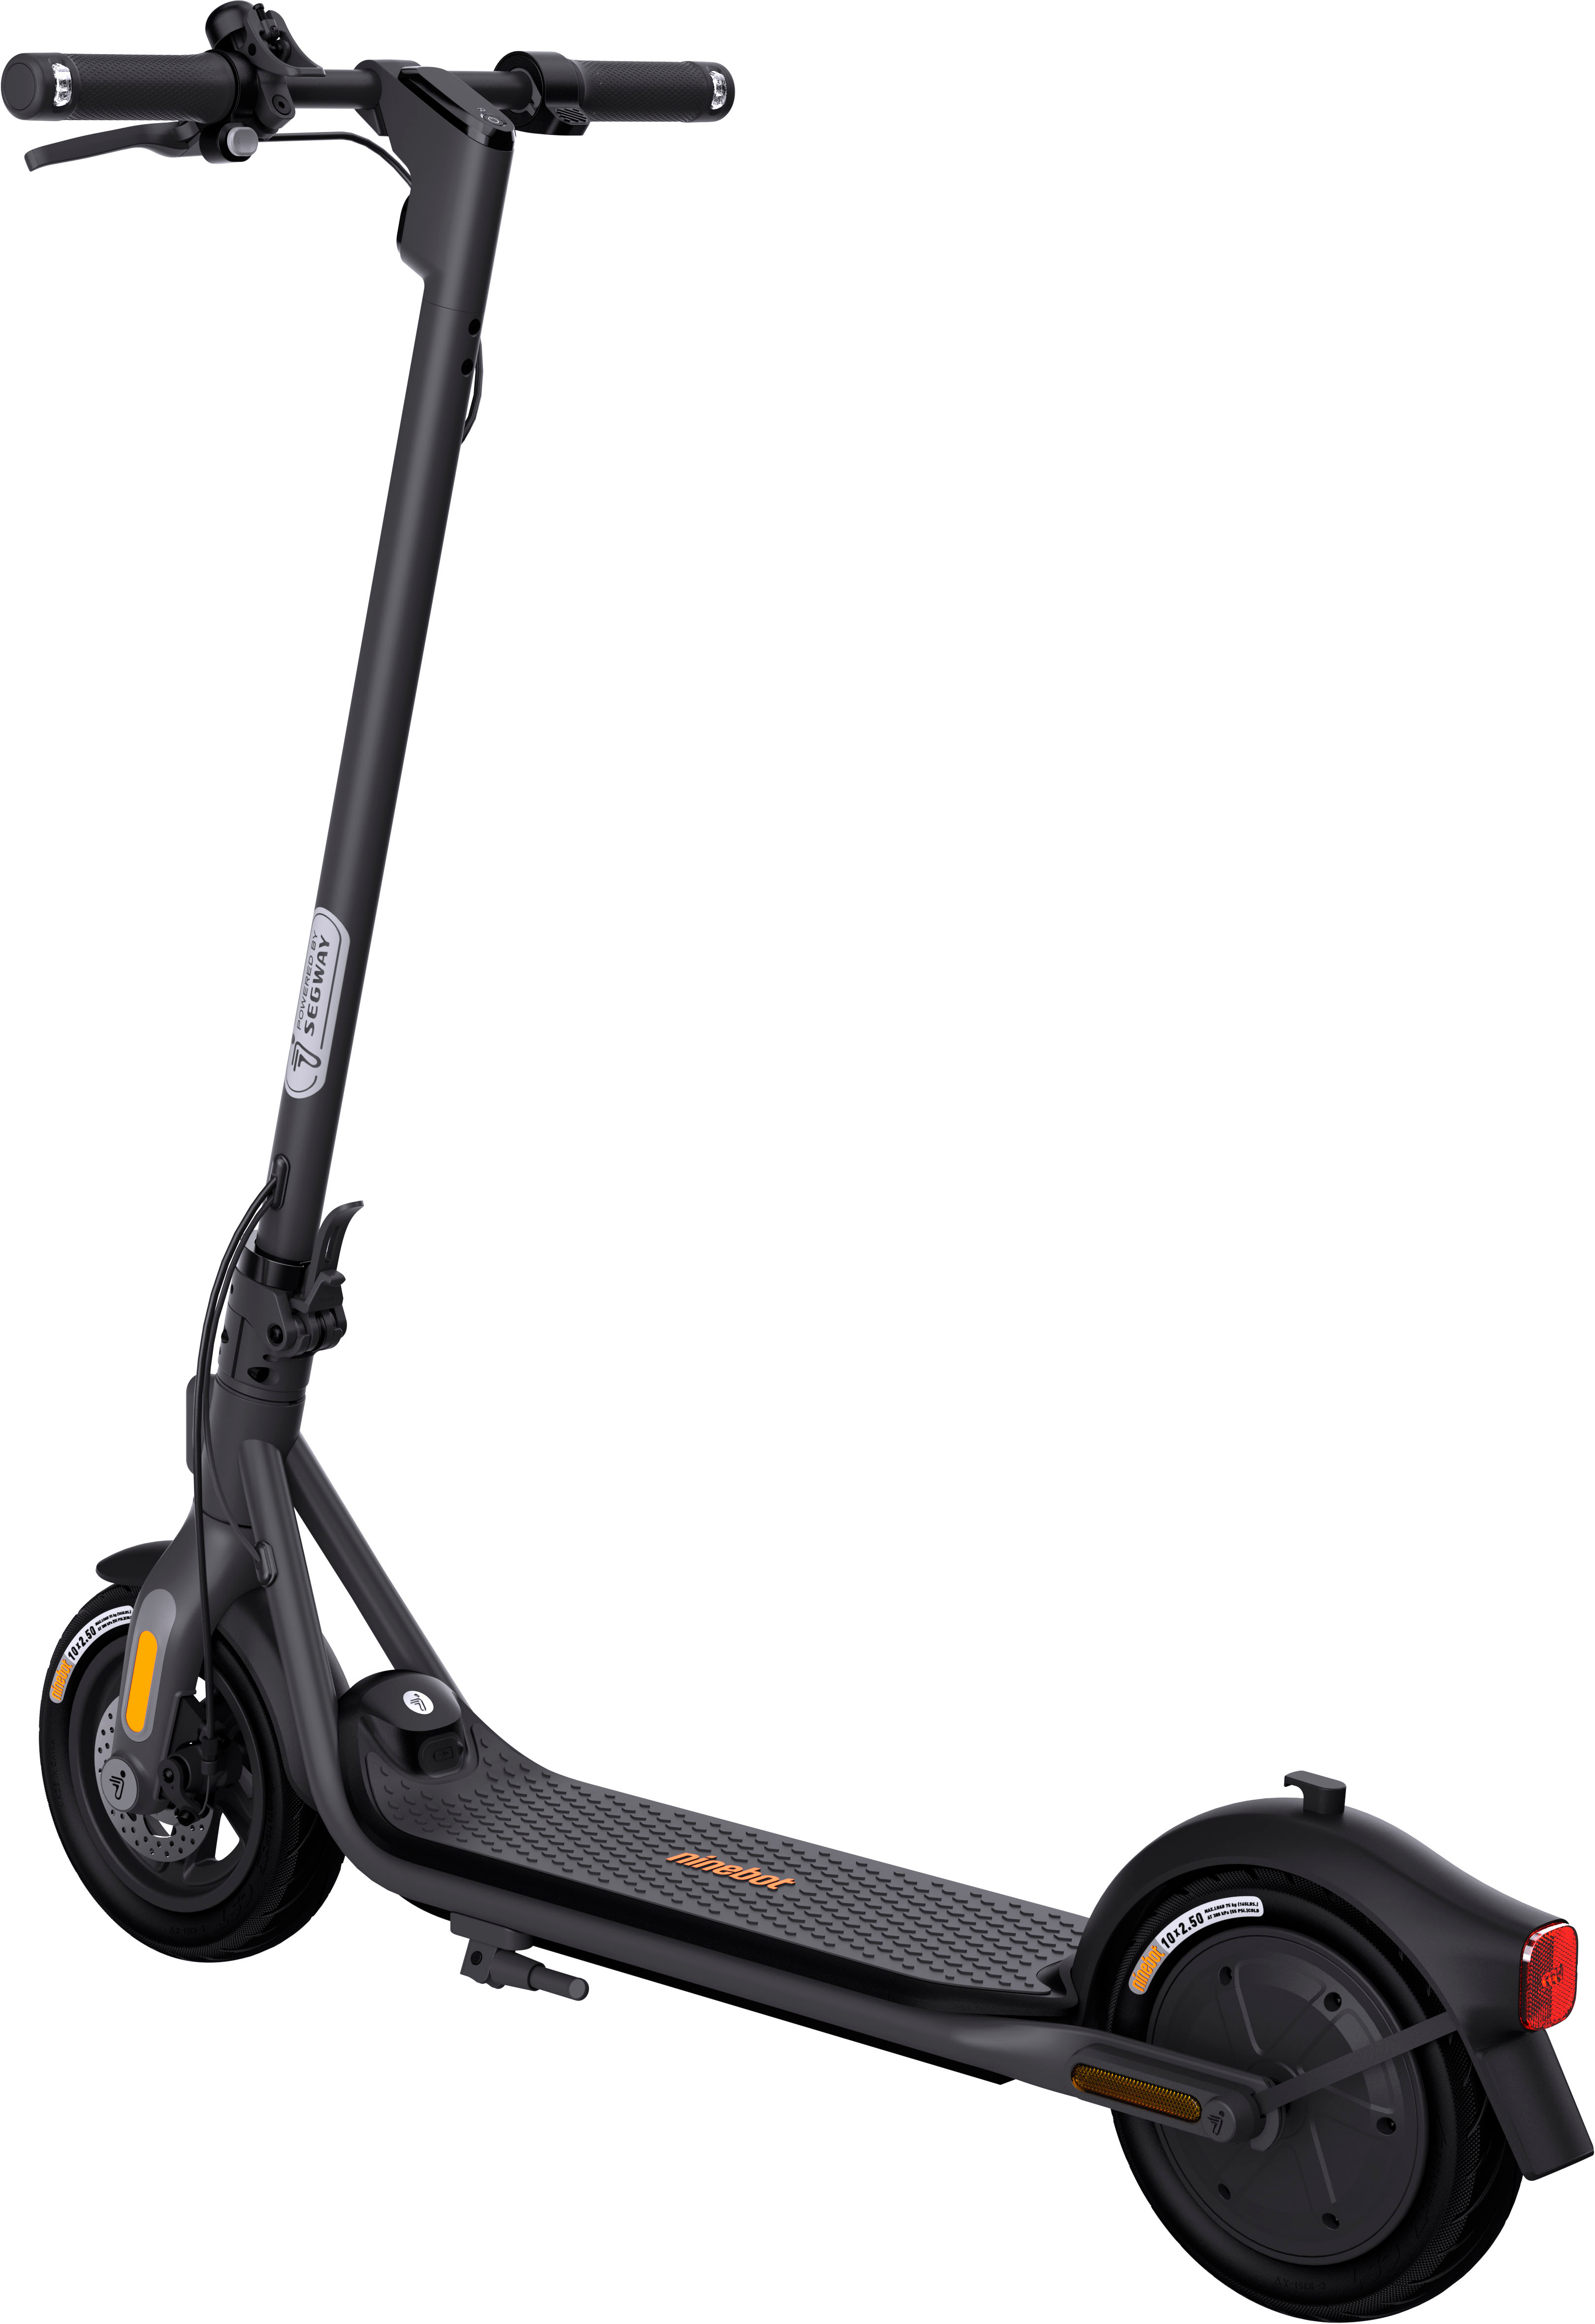 Angle View: Segway - Ninebot F2 Electric Scooter w/25 mi Max Operating Range & 18 mph Max Speed - Black